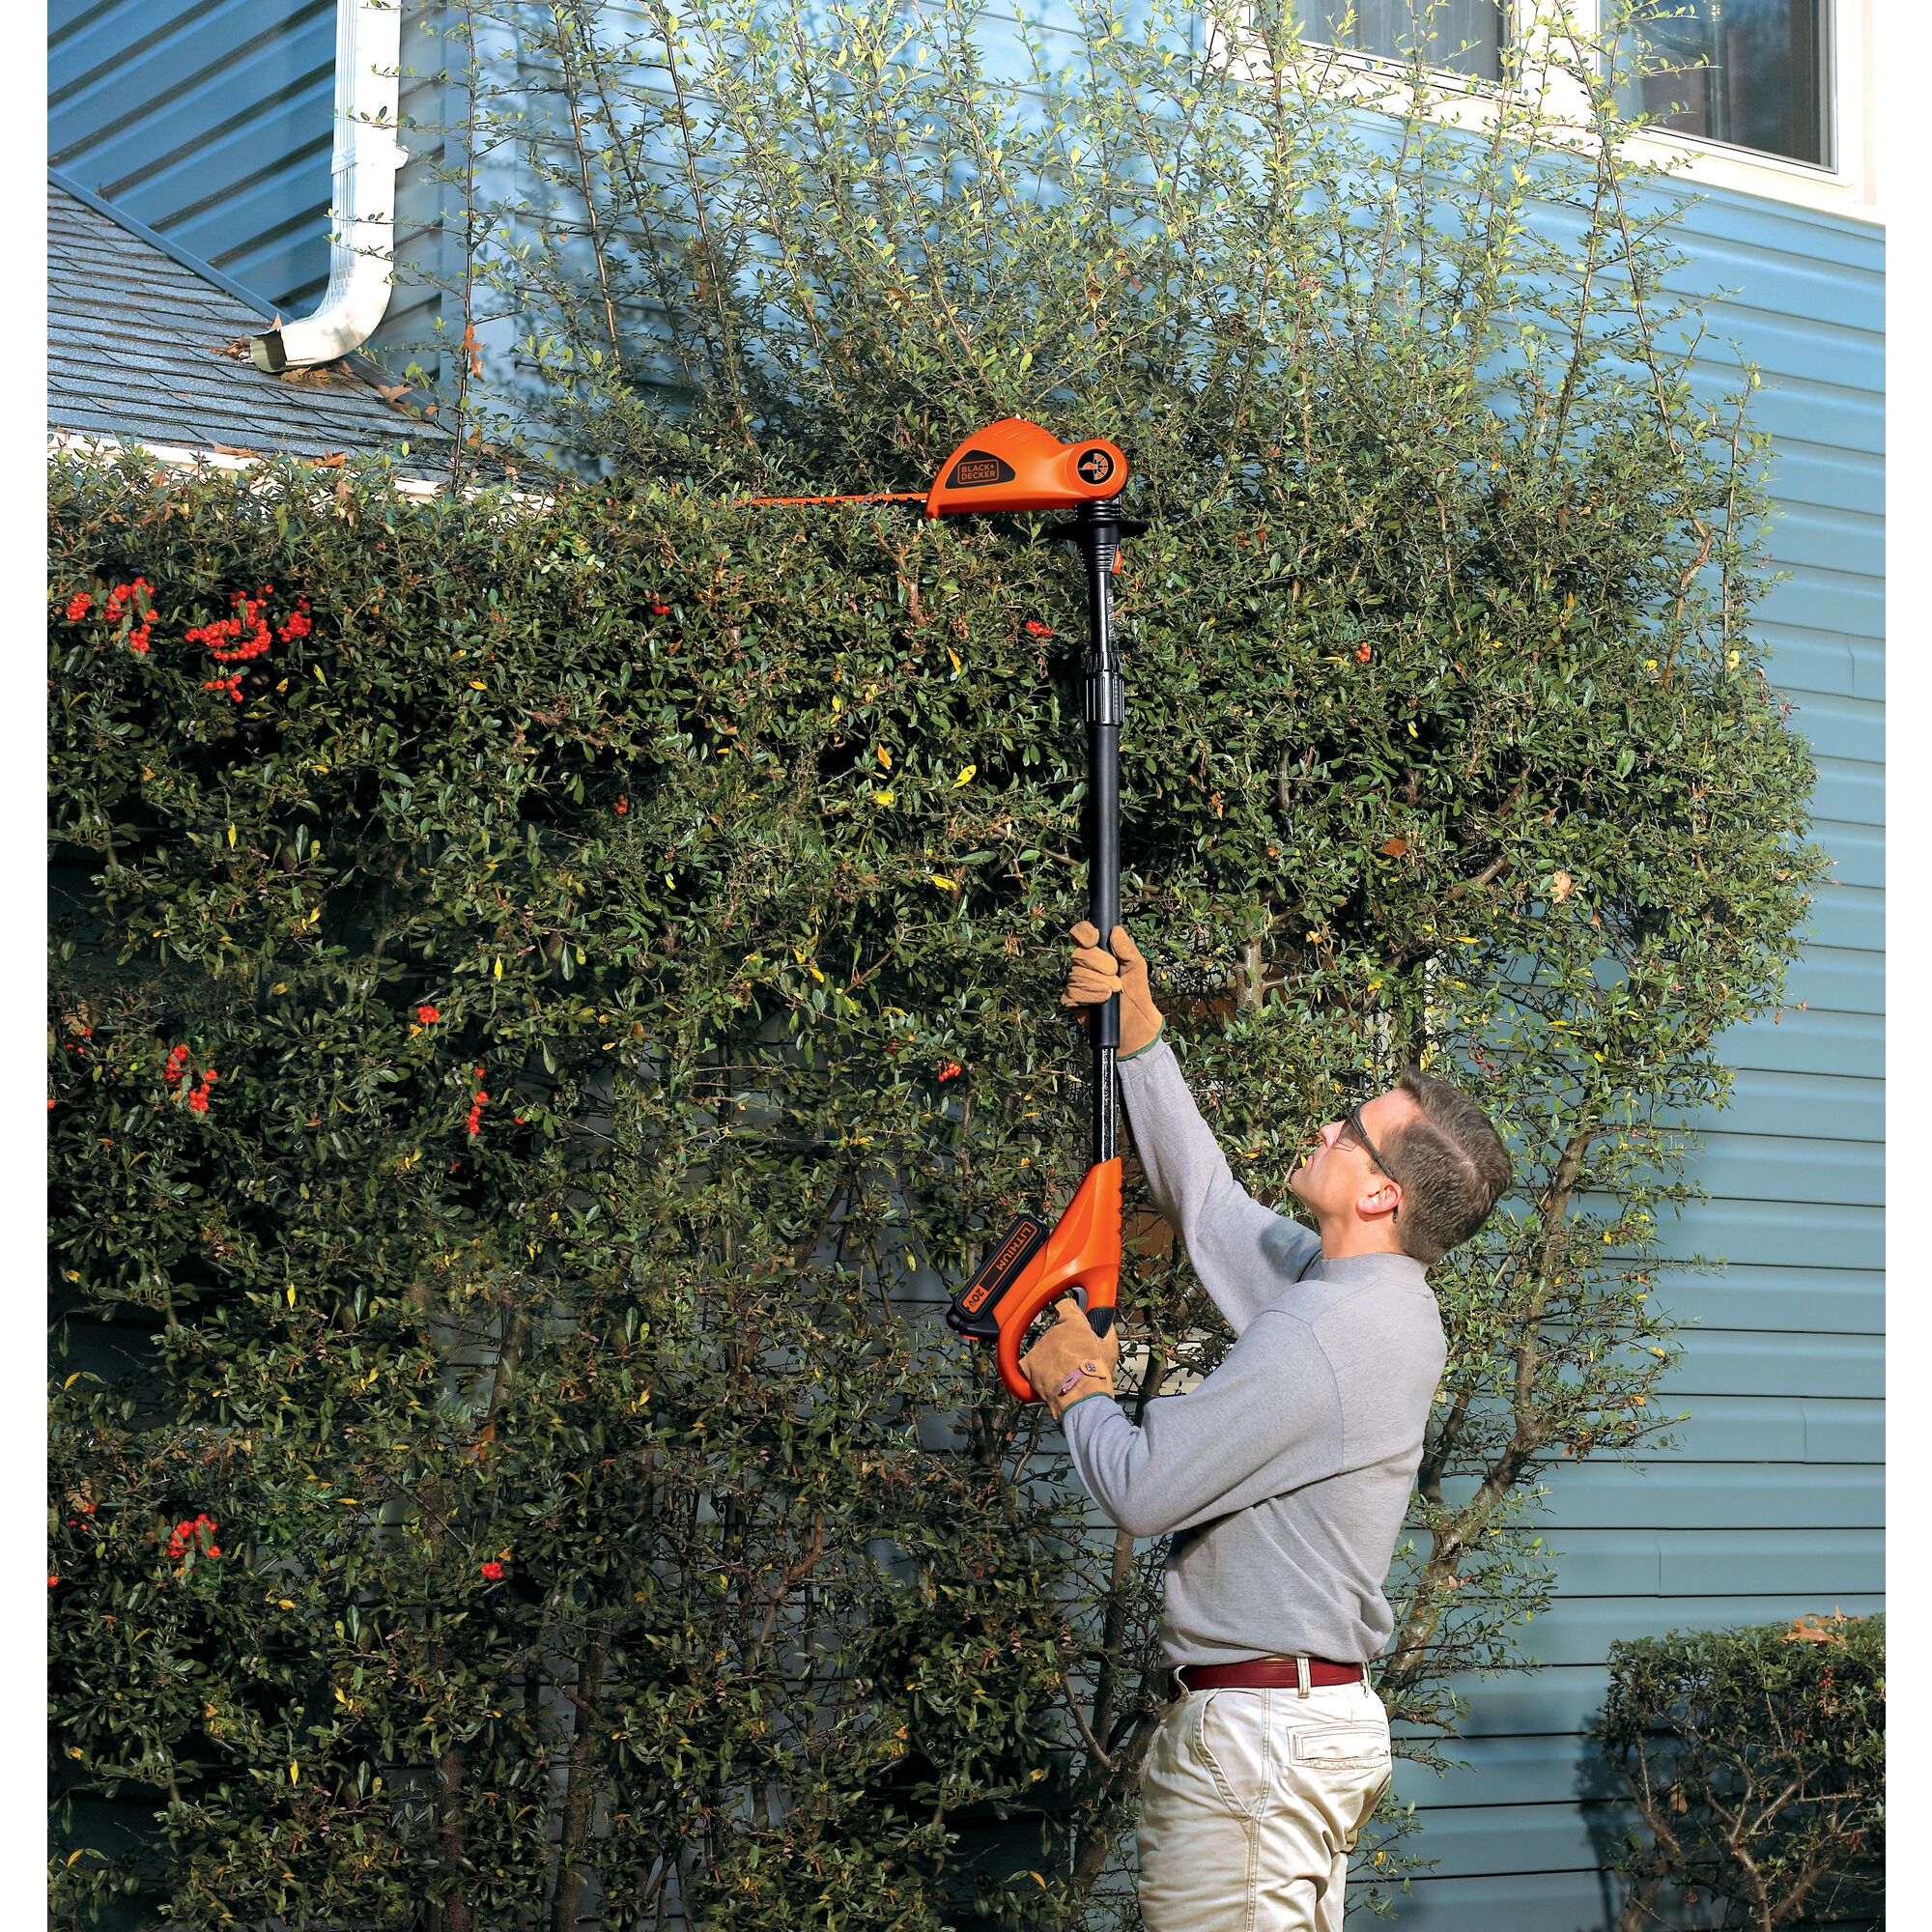 20 volt MAX Lithium Pole Hedge Trimmer being used by a person on hedges.